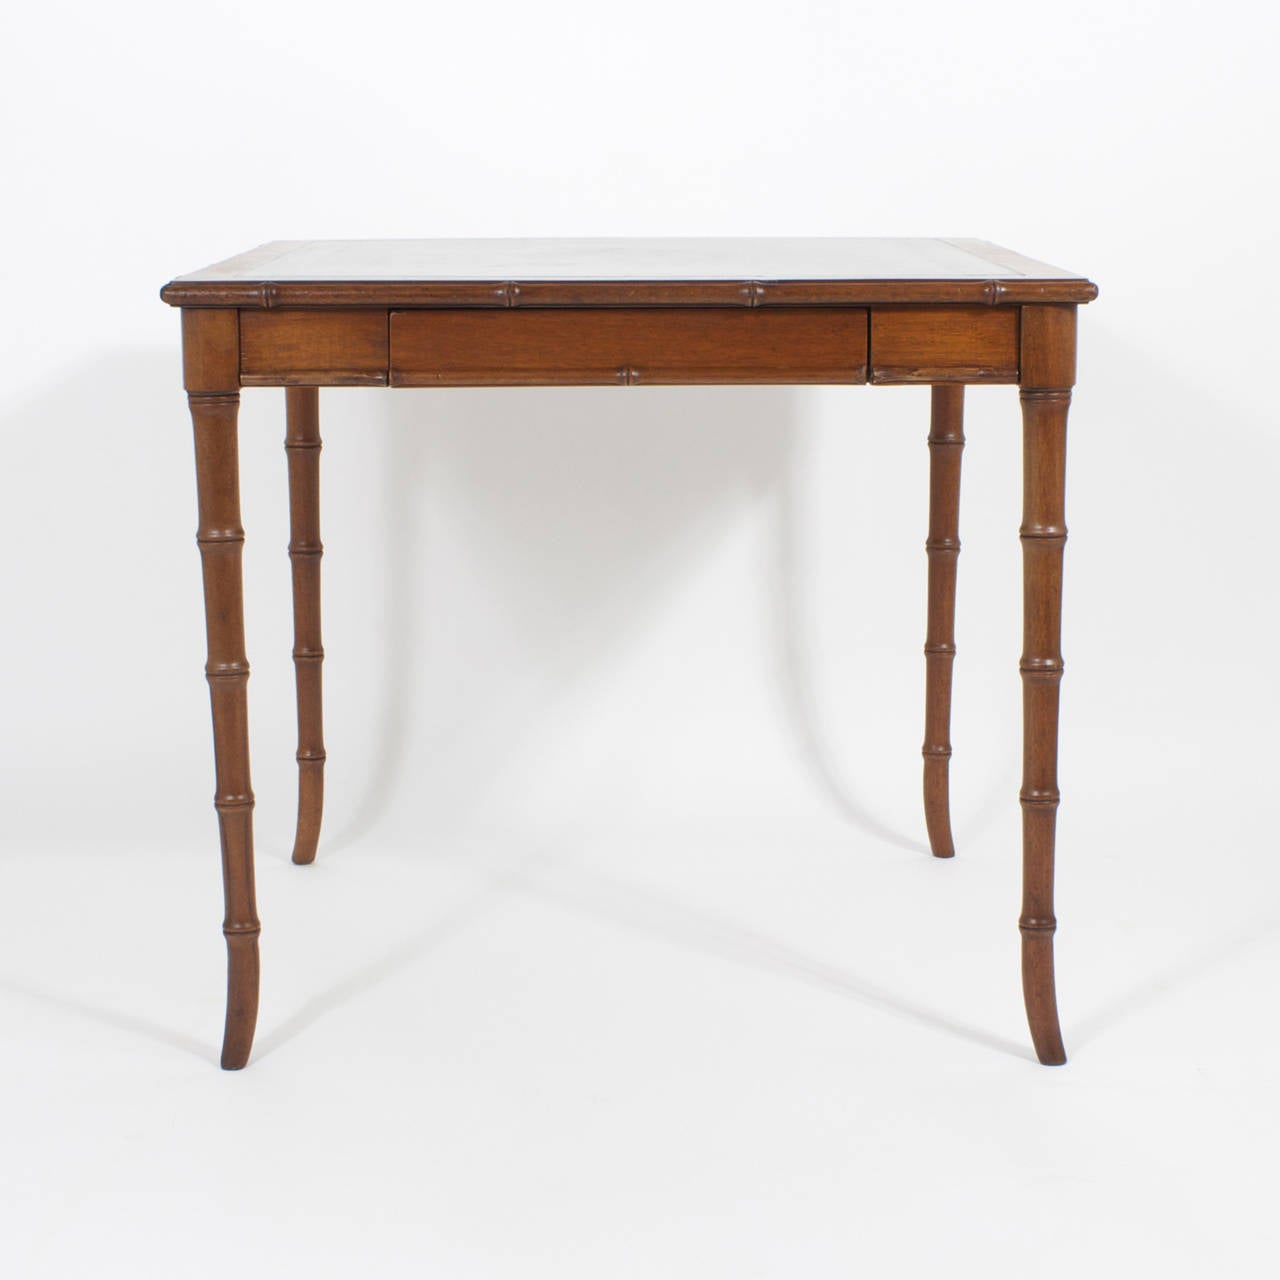 Tradition melds with modern in this regency style,  mid century faux bamboo  games table,  featuring elegant faux bamboo legs and a tooled leather top. Newly polished.